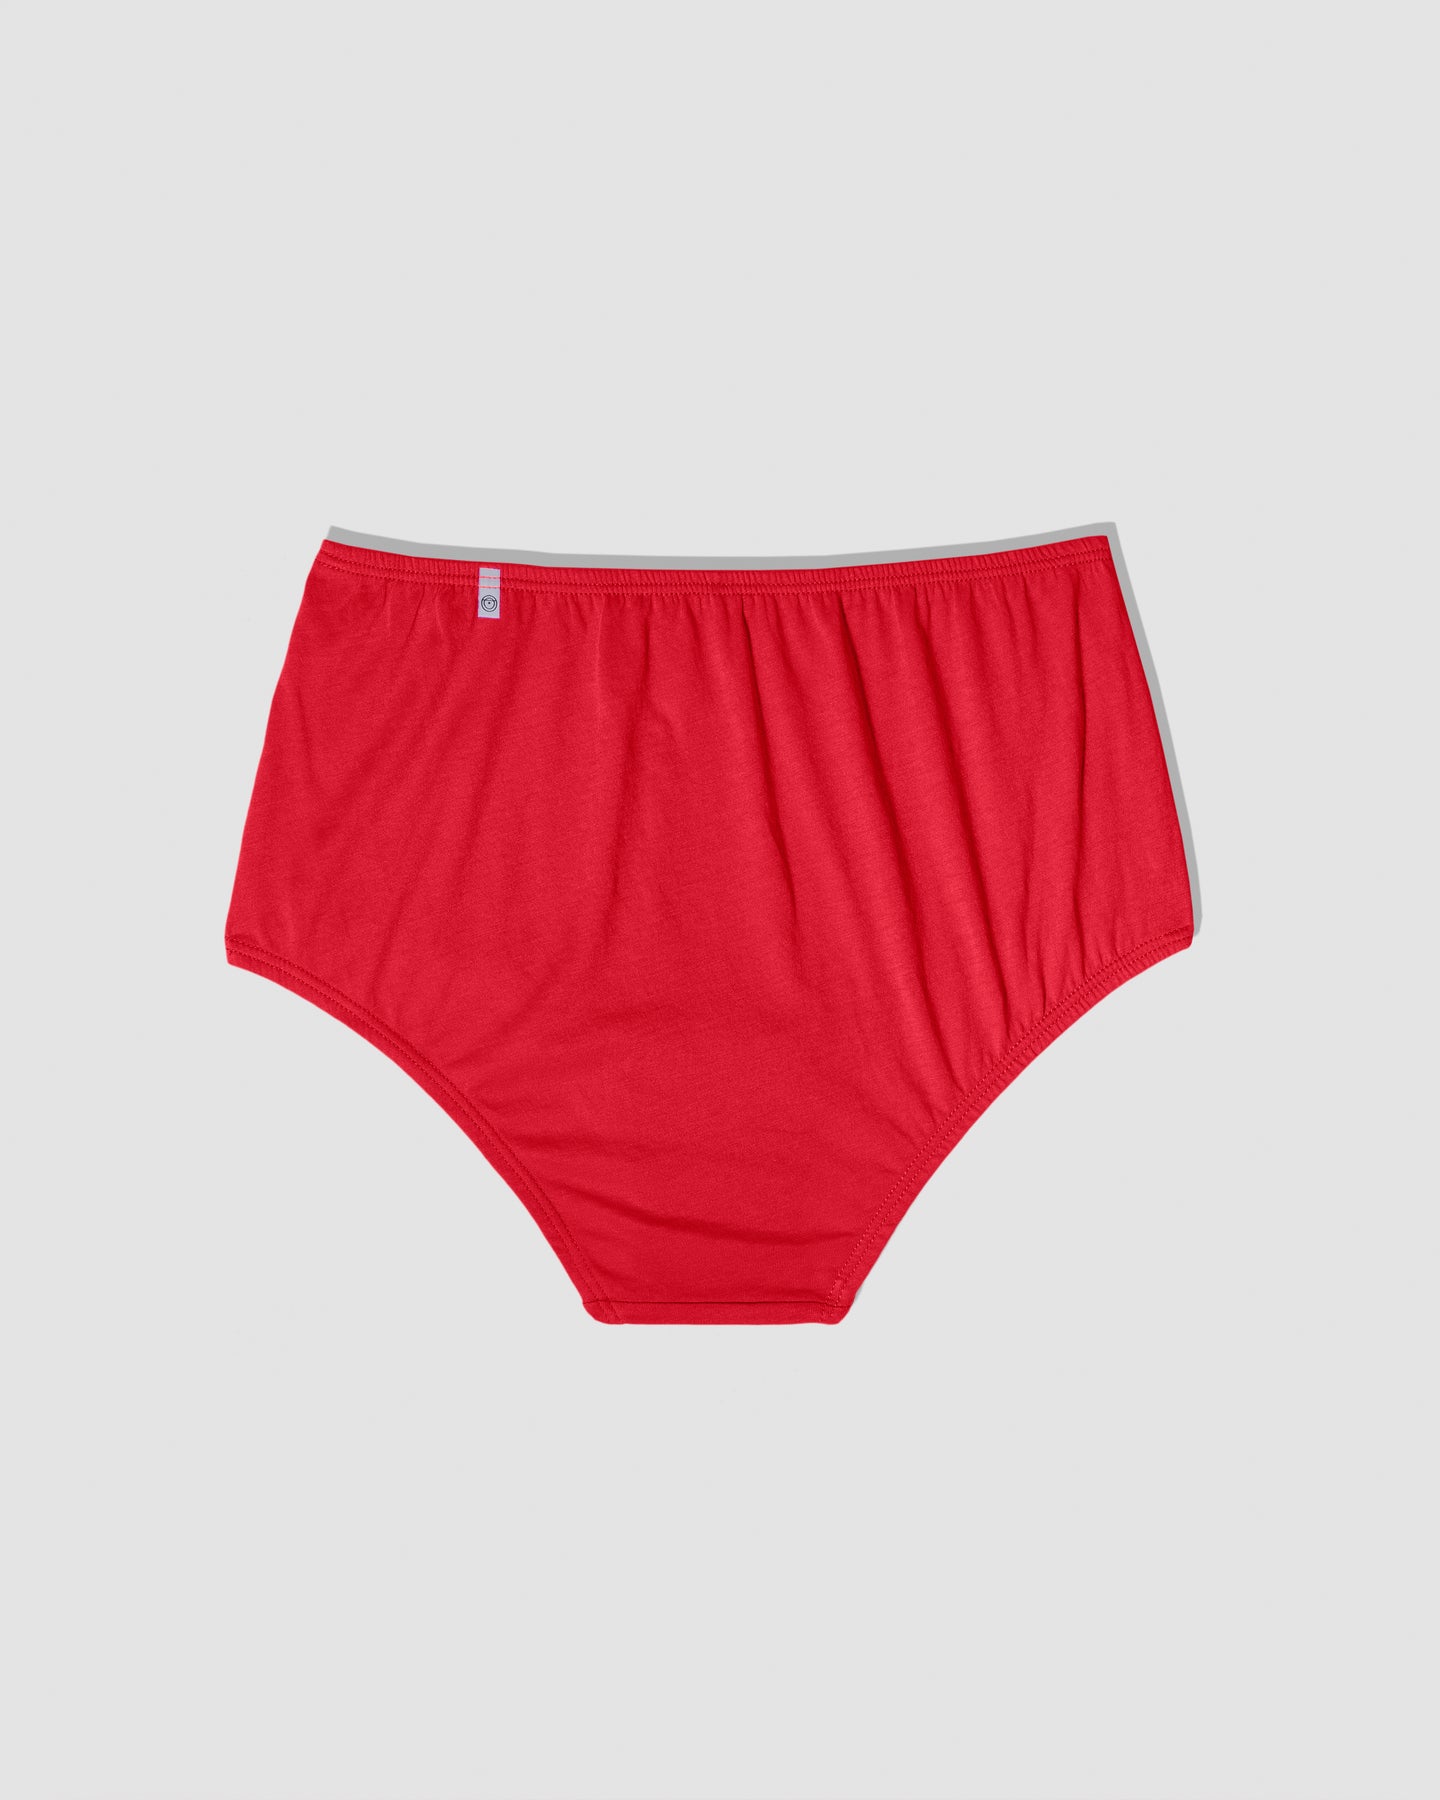 Buy Organic Womens Underwear, Choose Your Print, Low or High Rise Knickers,  Colourful Womens Pants, Funky Womens Undies, Comfy Briefs. Online in India  